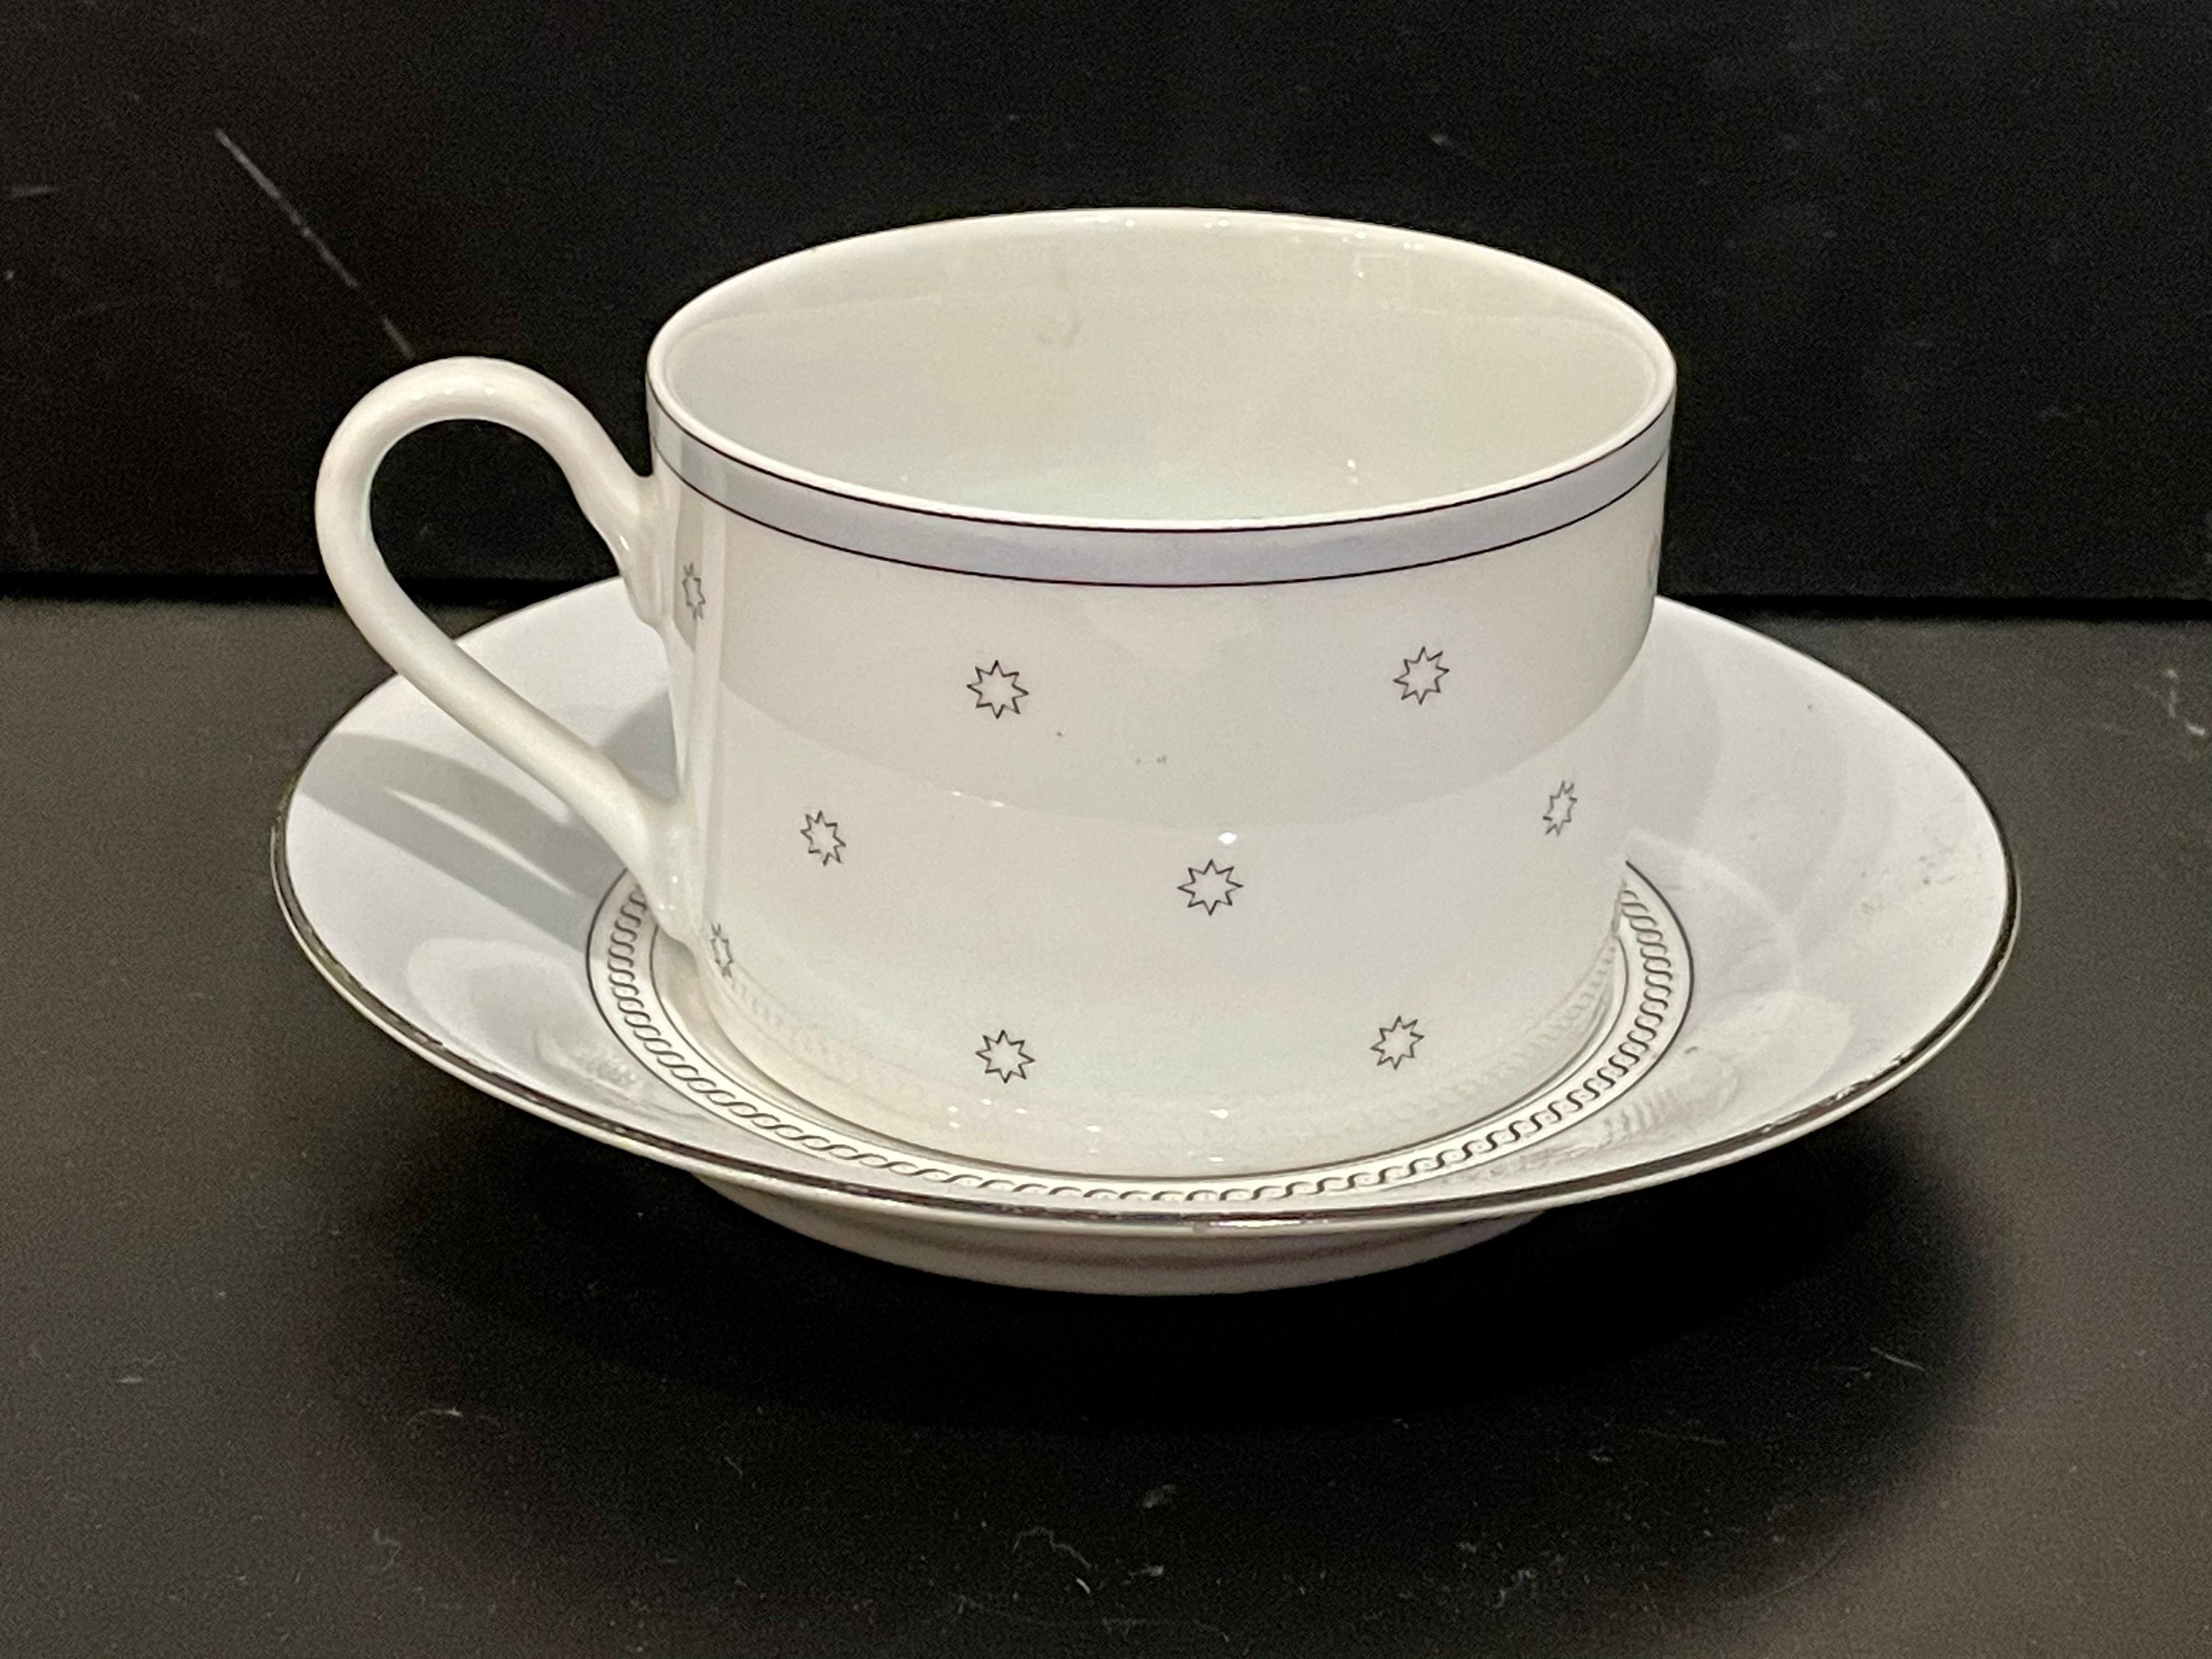 Beautiful set of single coffee cup and saucer designed by Michael Graves for Swid Powell, very rare set designed in 1987 in porcelain finish. The saucer is 6